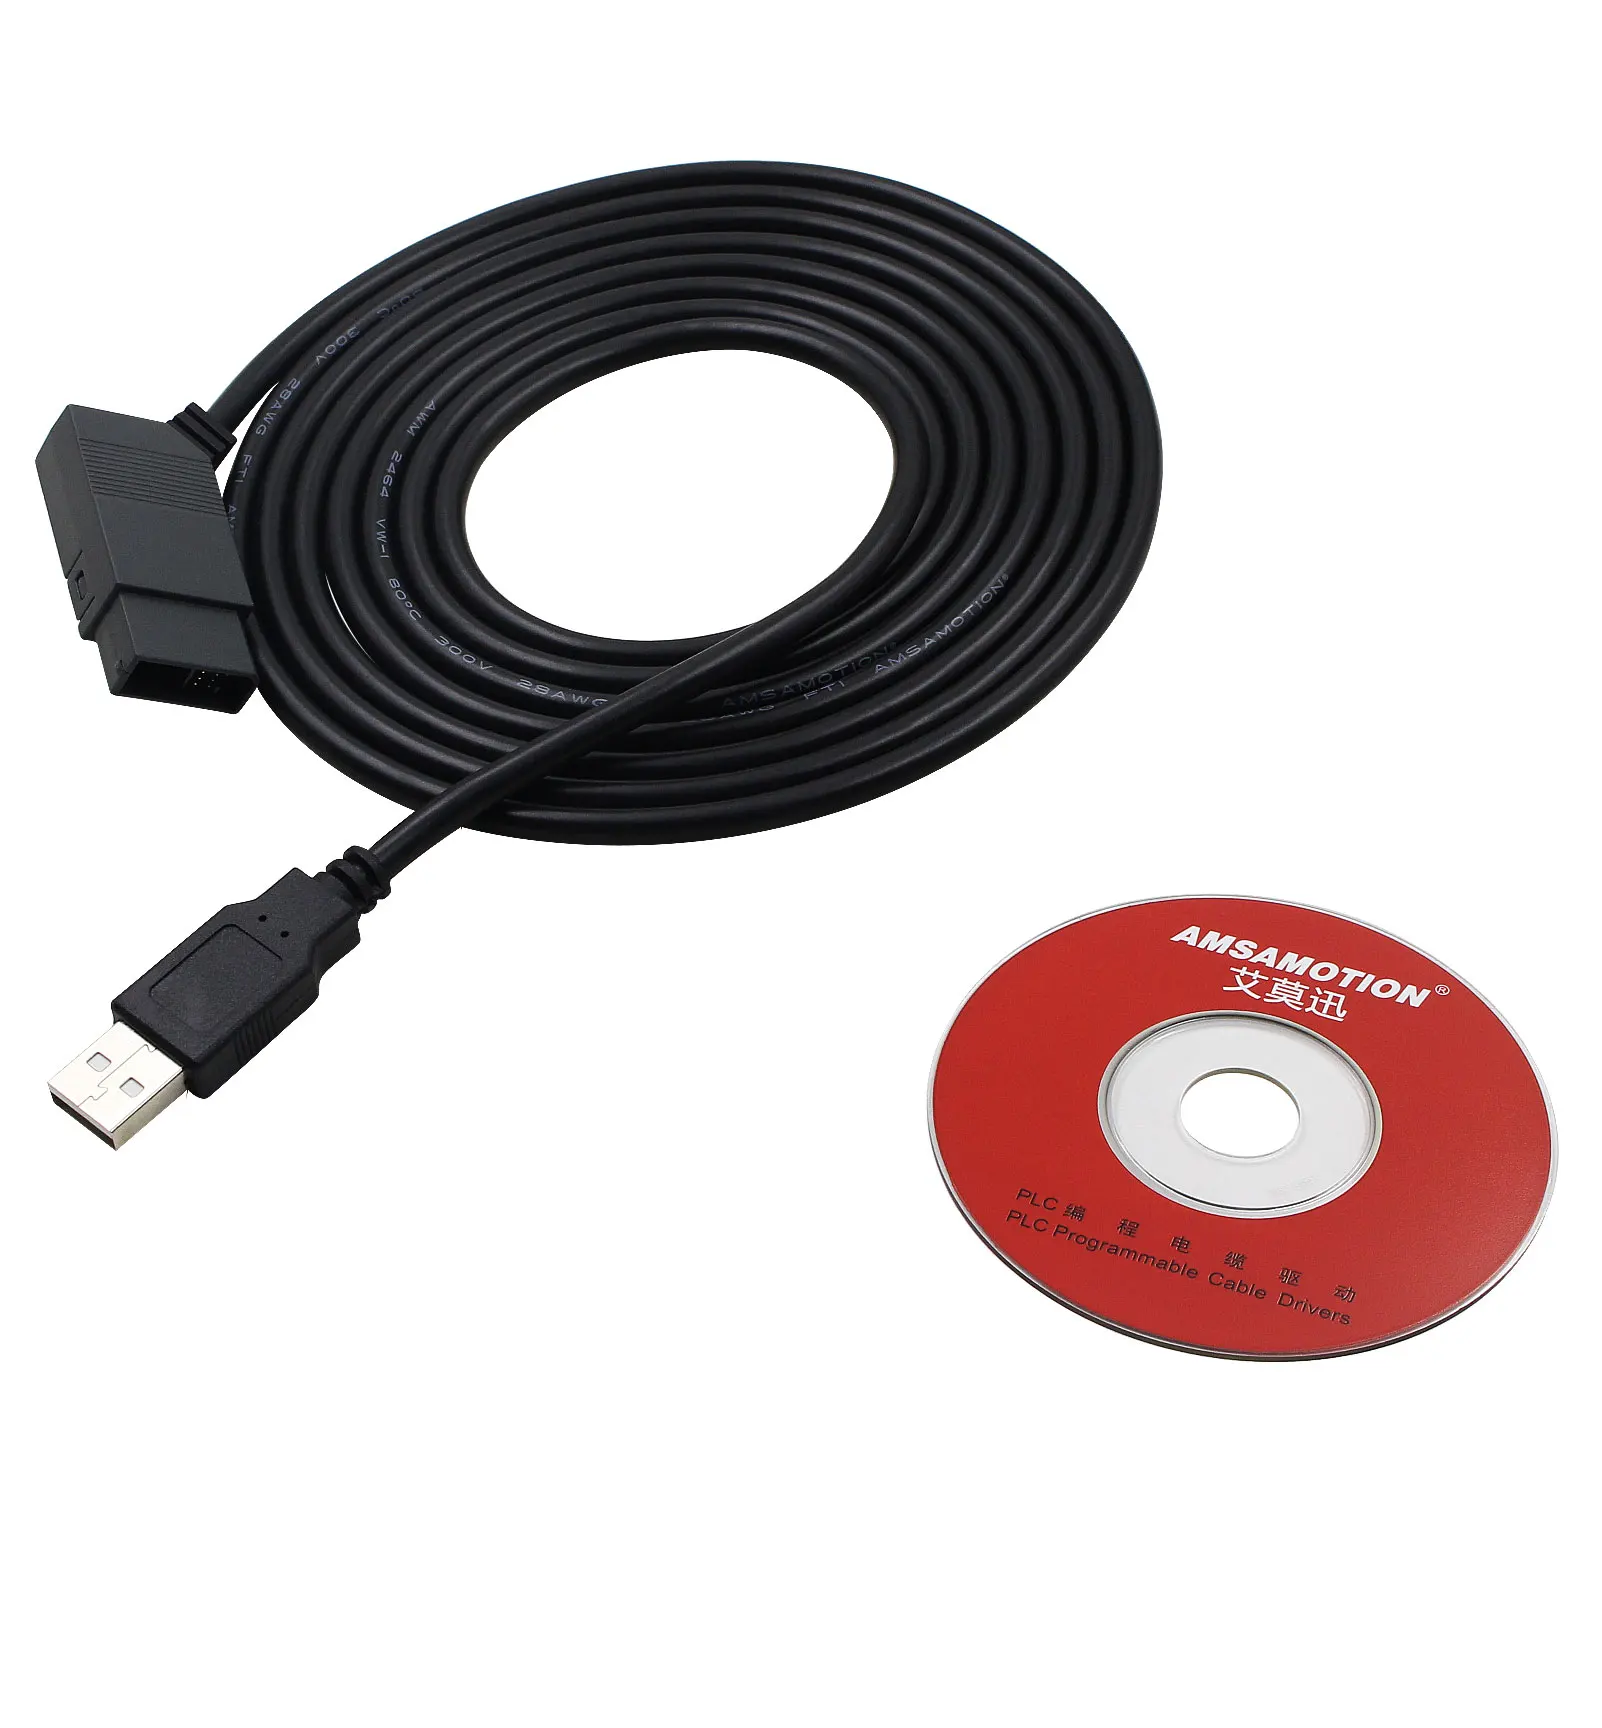 Usb-Cable Usb-Logo Plc Cable For Siemens Logo LOGO230RC Isolated Cable New px 